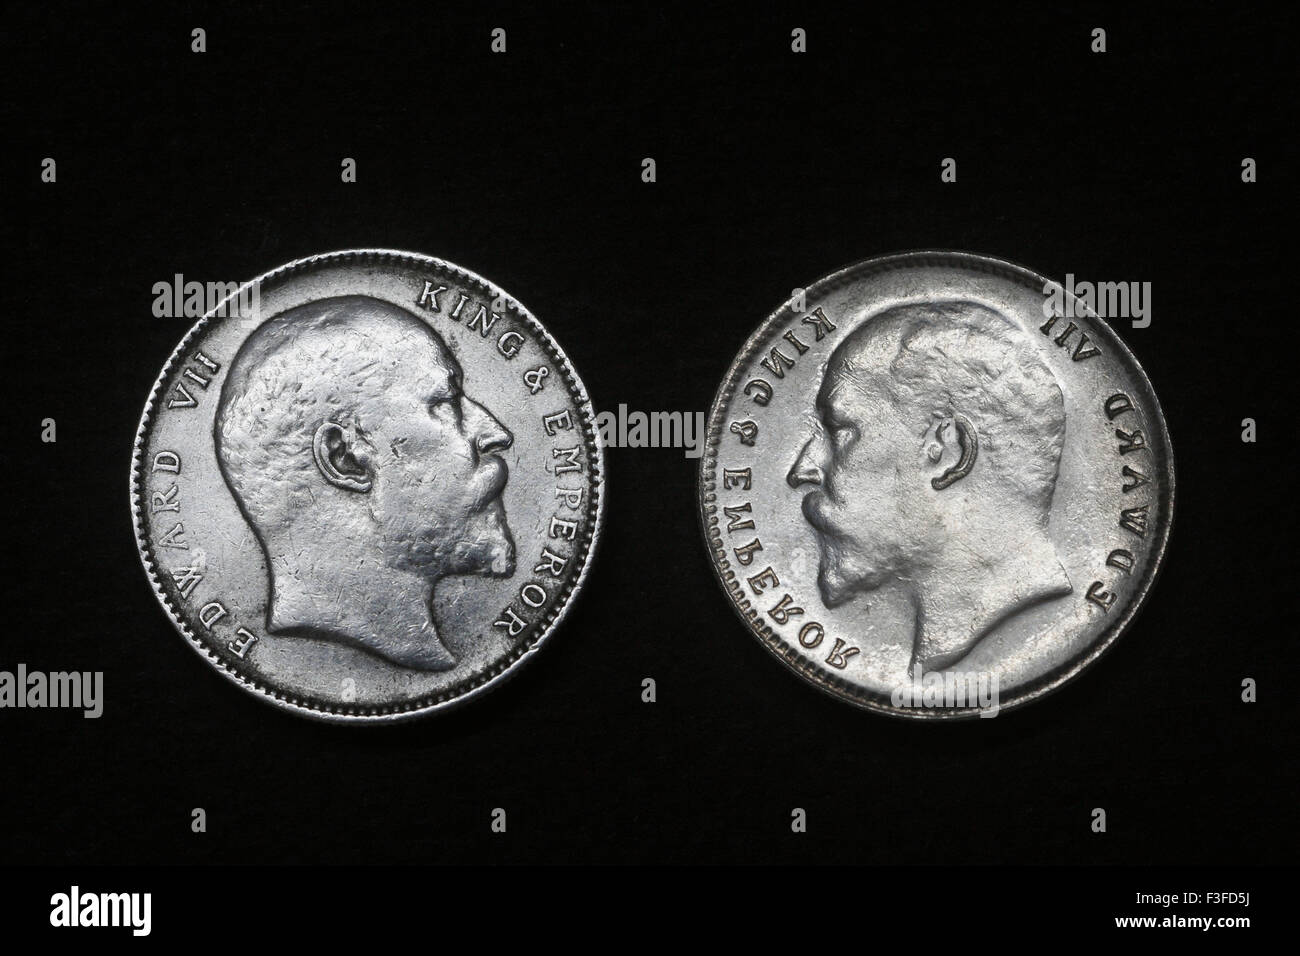 Coinage ; India coinage ; Edward VII king and emperor on coin Stock Photo